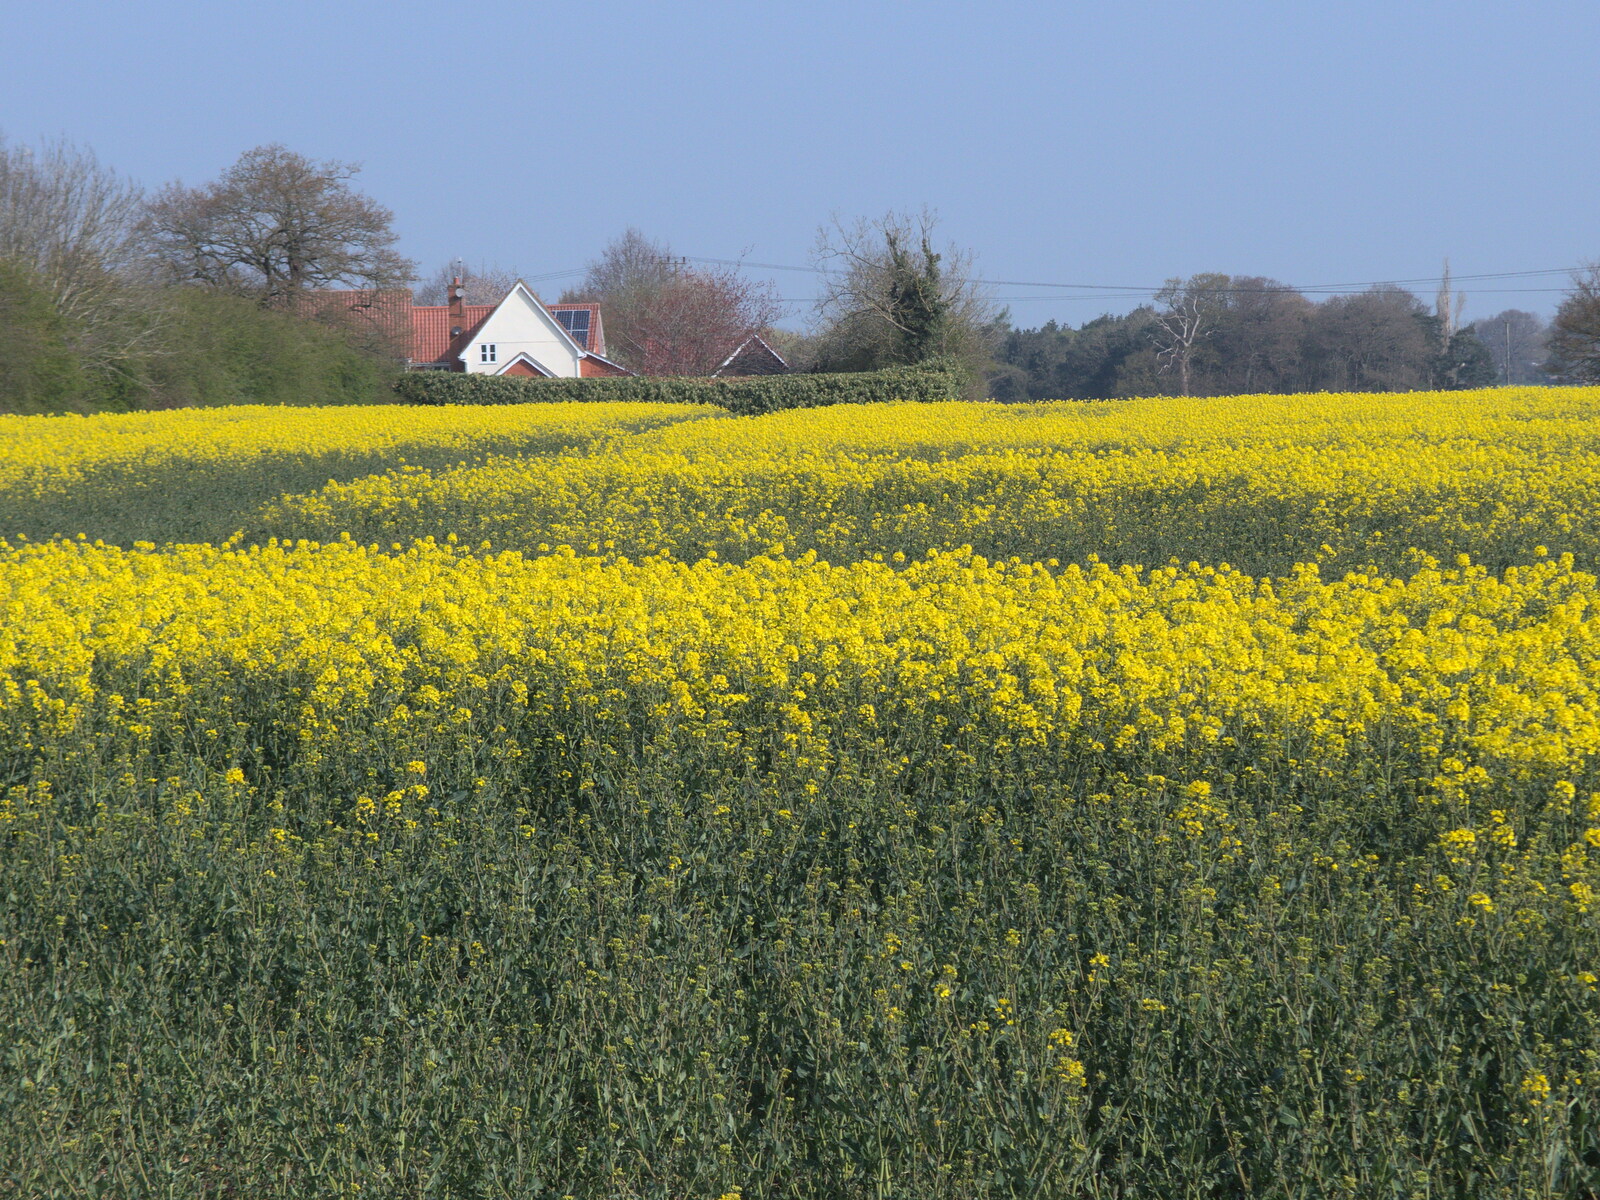 A field of oilseed just outside Eye, on the B1077 from BSCC Beer Garden Hypothermia, Hoxne and Brome, Suffolk - 22nd April 2021